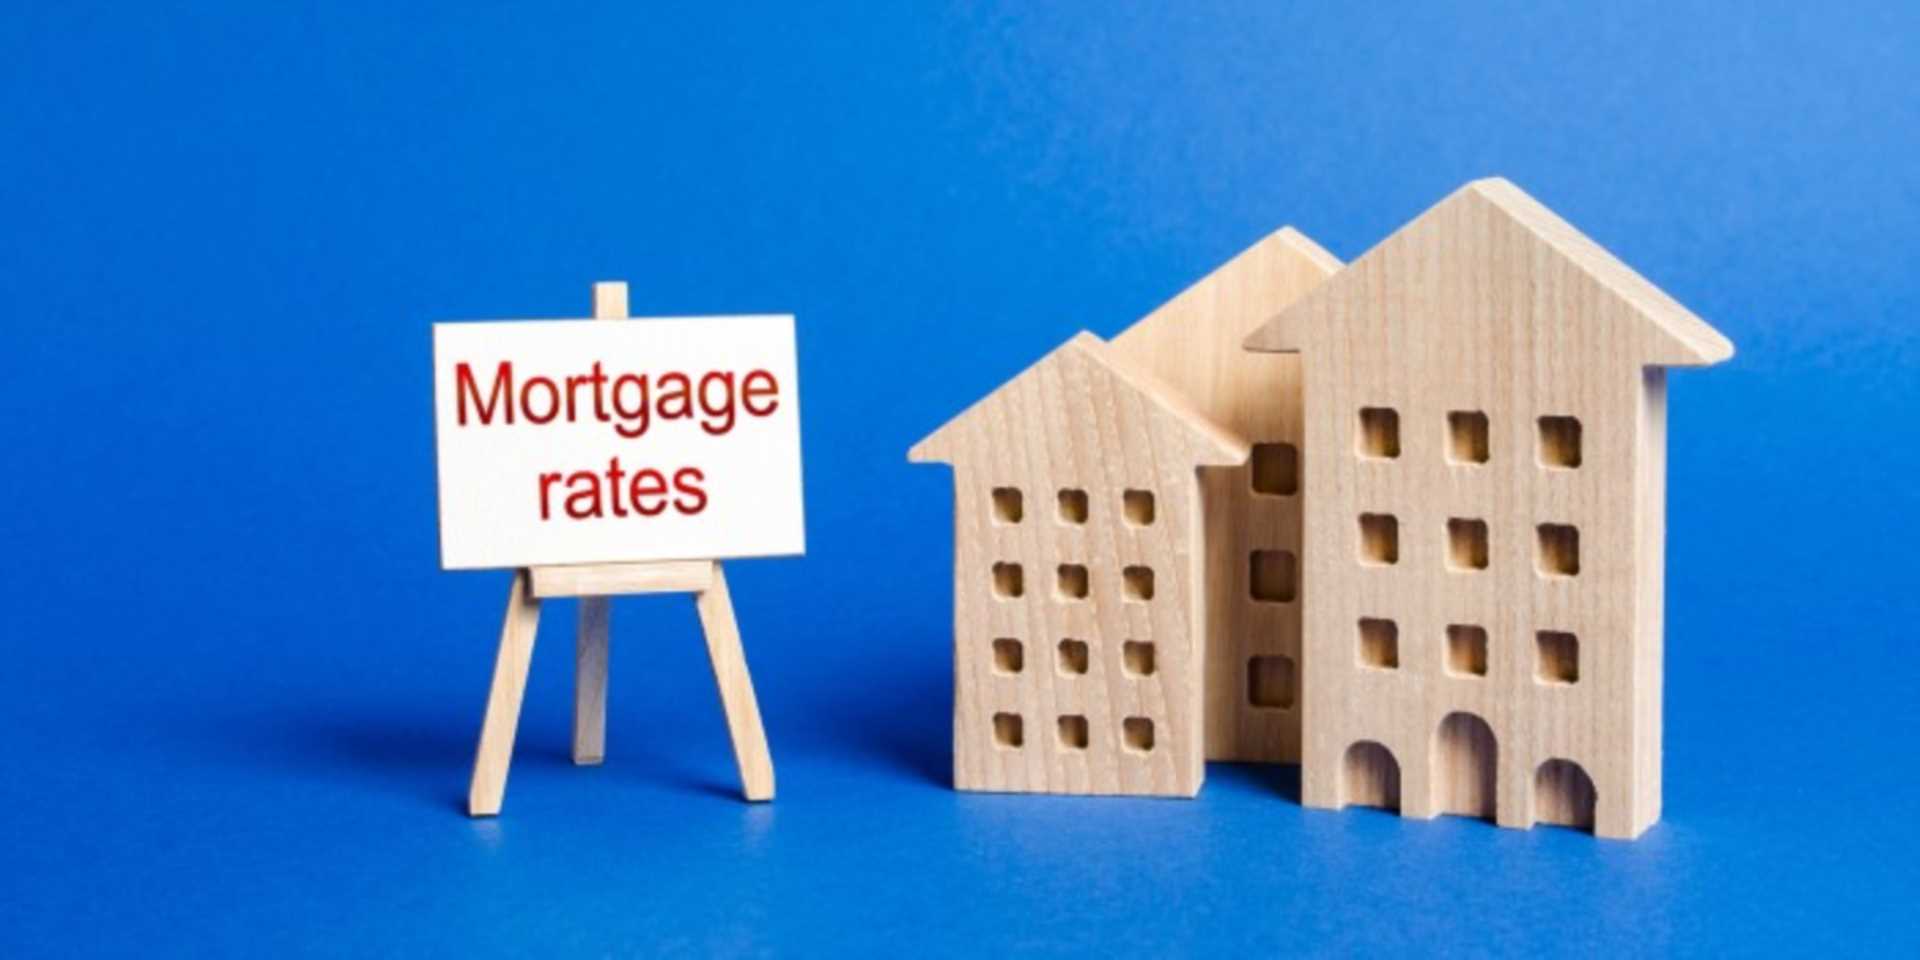 Base rate rises to 4.25% but new fixed rate mortgages to stay at 4-4.75% for 2023.